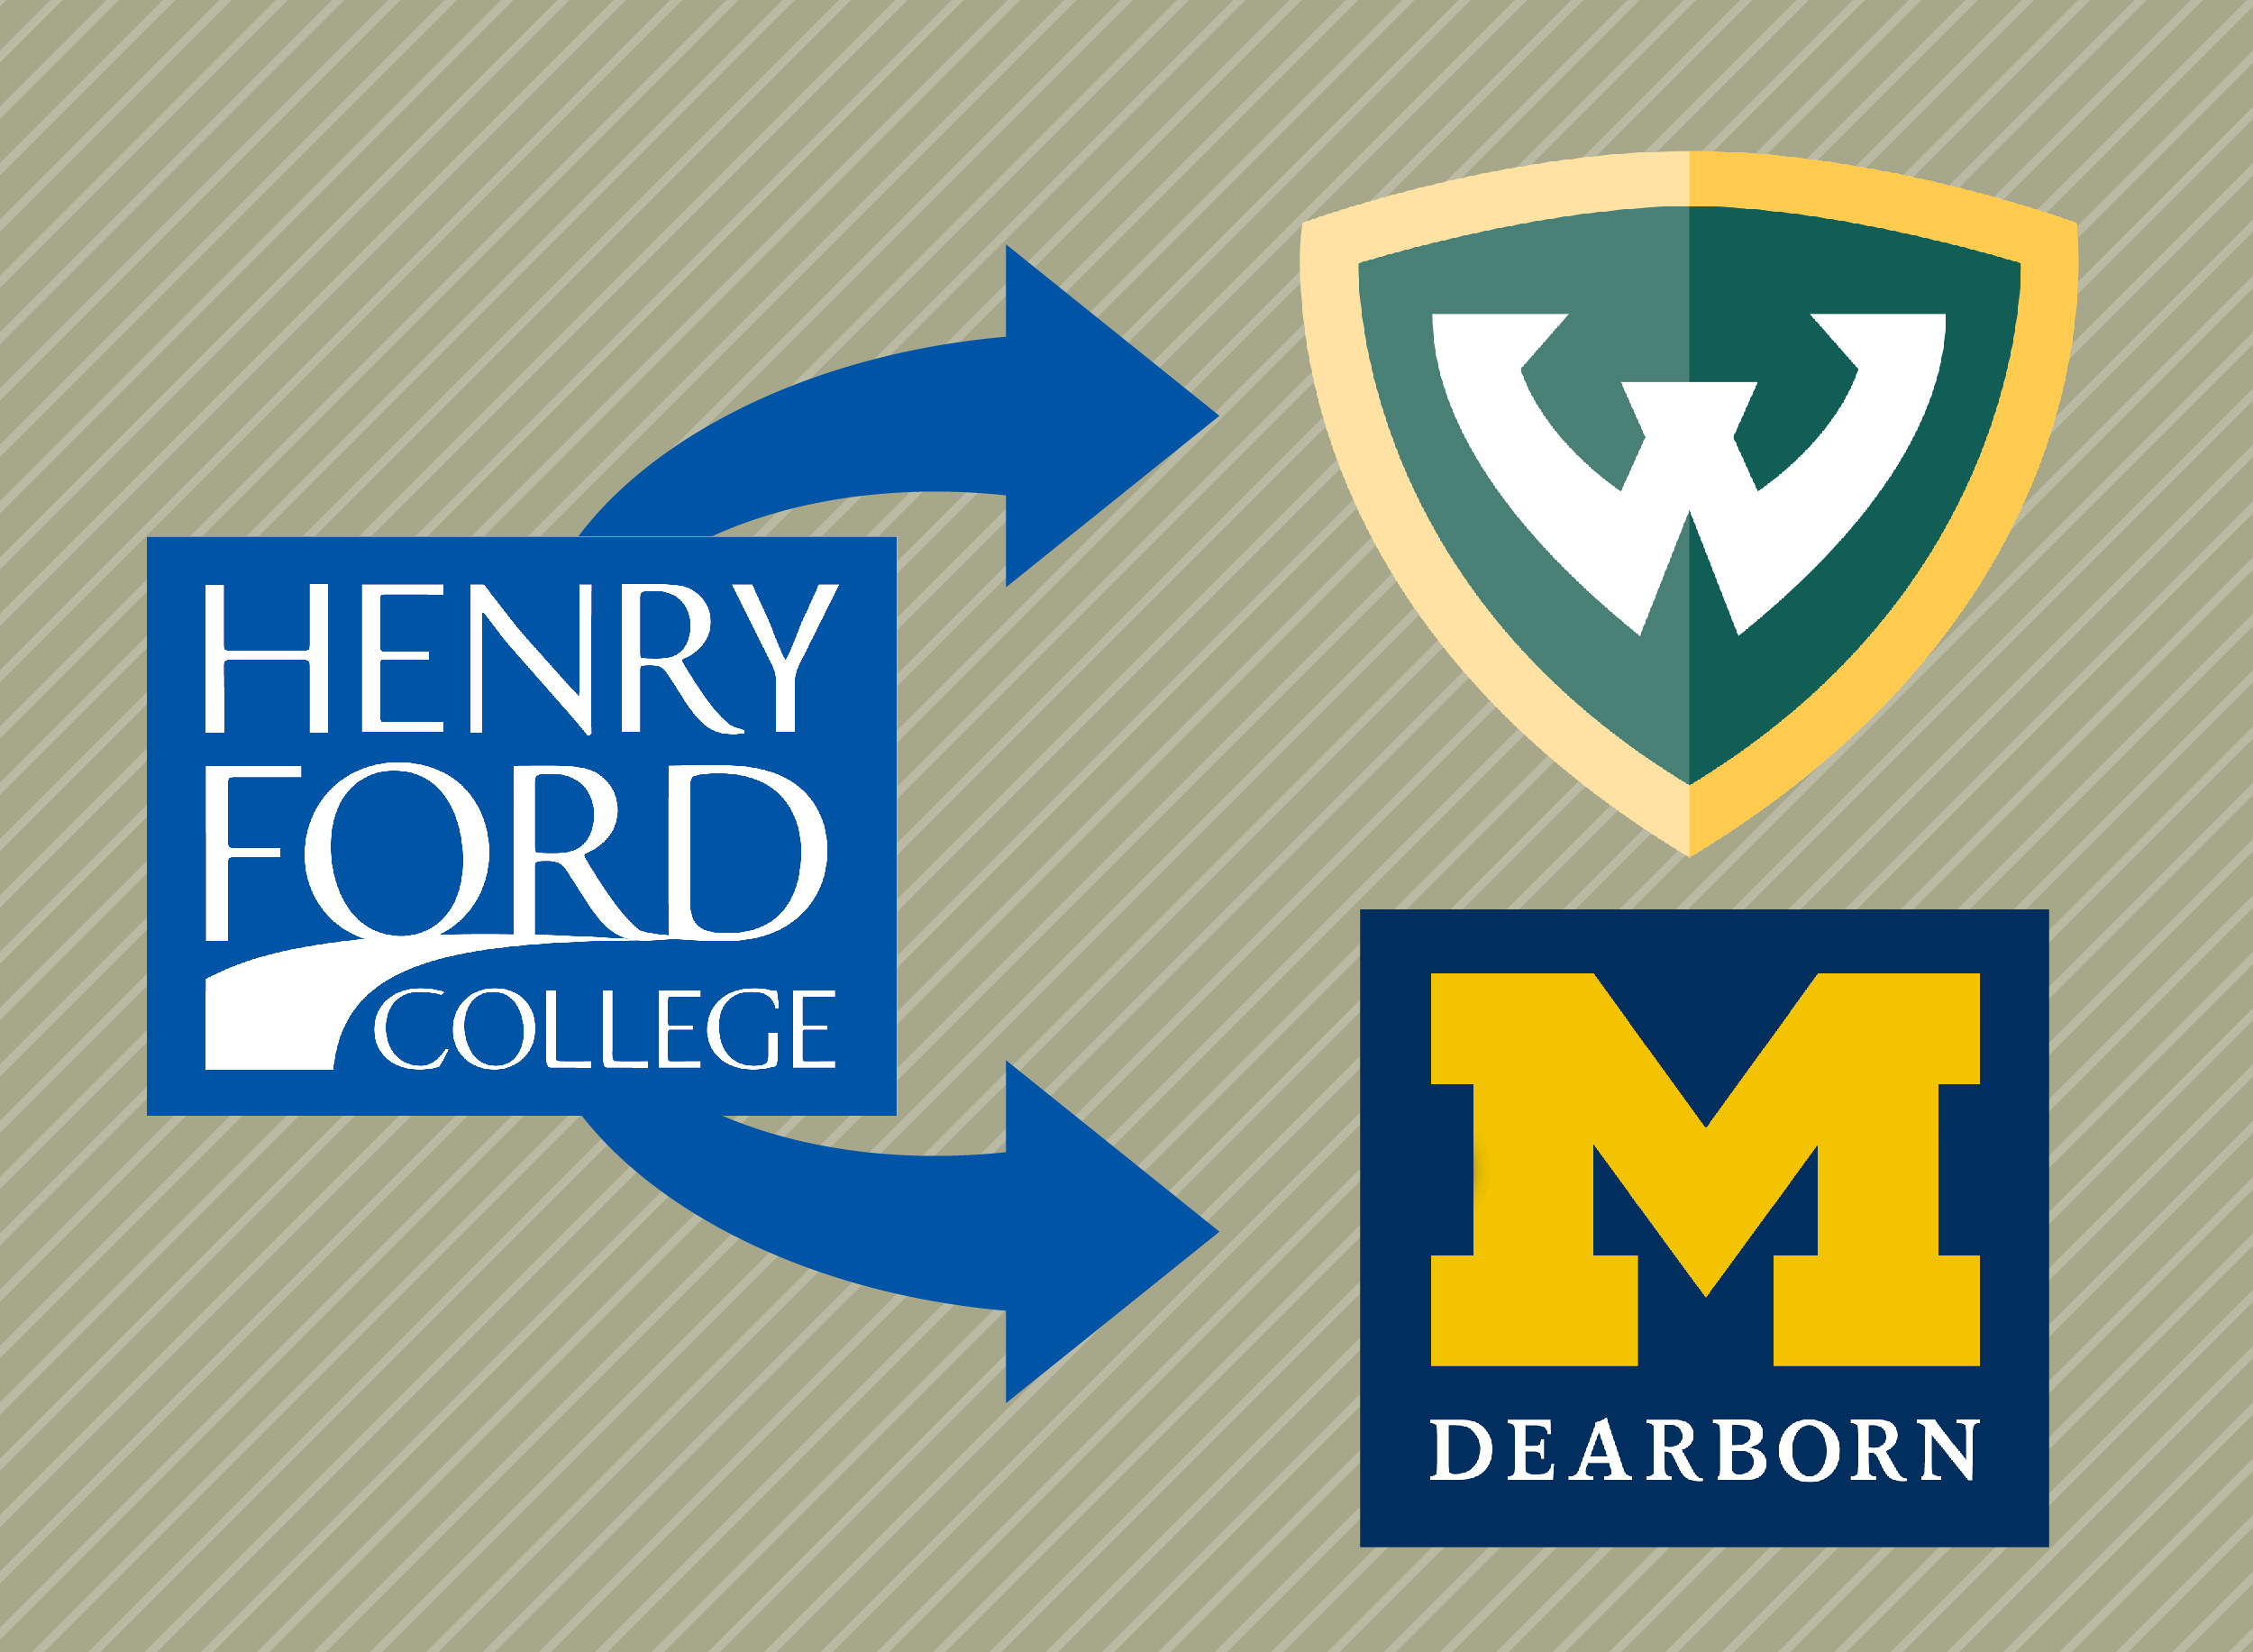 Henry Ford College logo with arrows to UM-Dearborn logo and Wayne State University logo